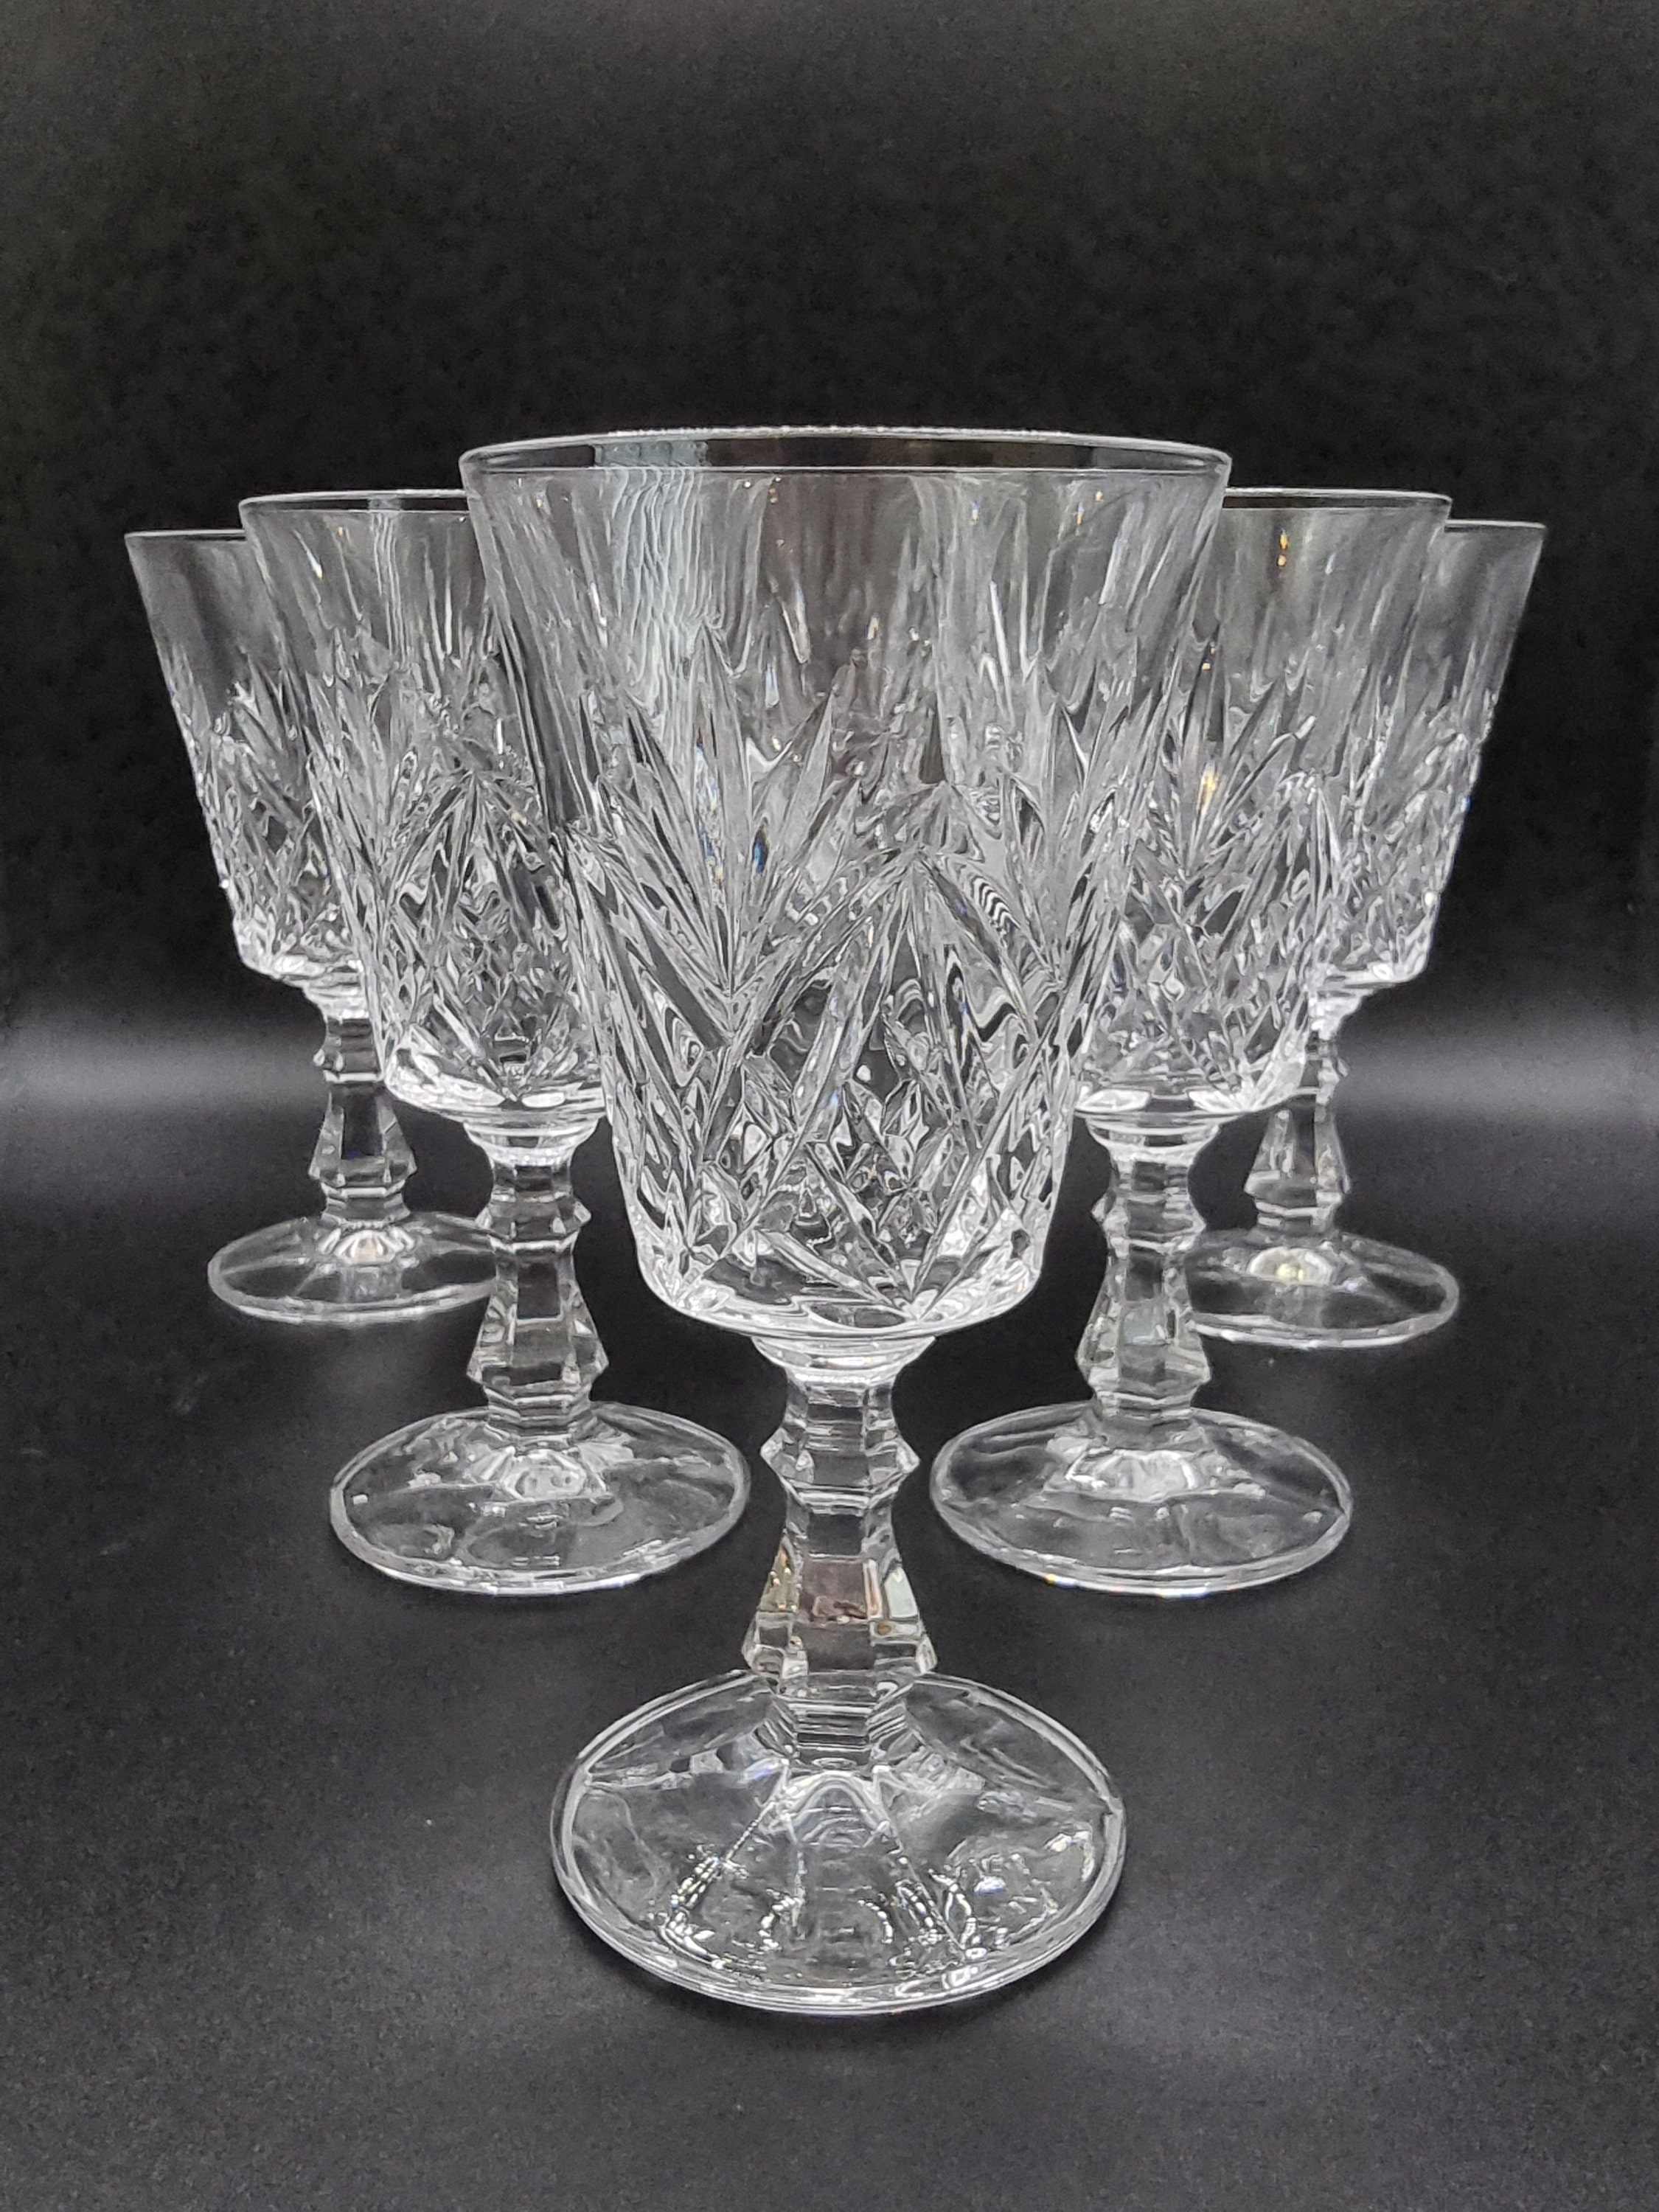 Beautiful Set of 6 Crystal Water Goblets “Fascination” By Cristal